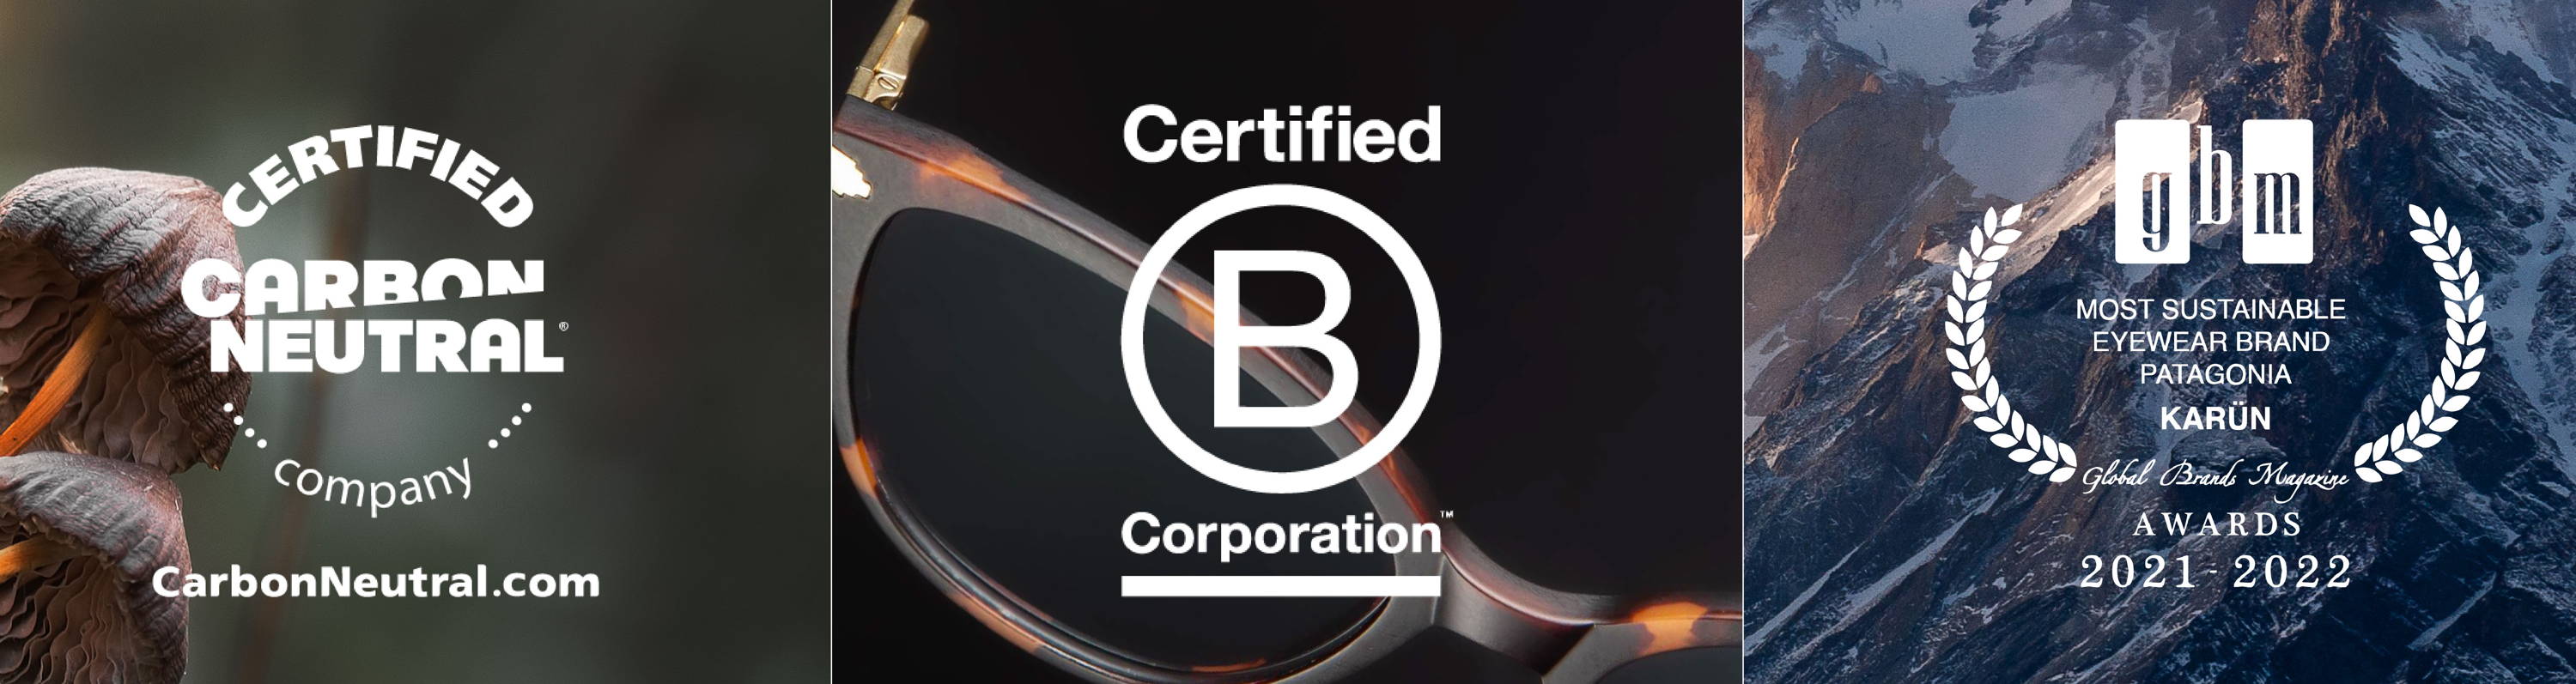 B Certified Corporation, Most Sustainable eyewear brand patagonia, certified carbon neutral company